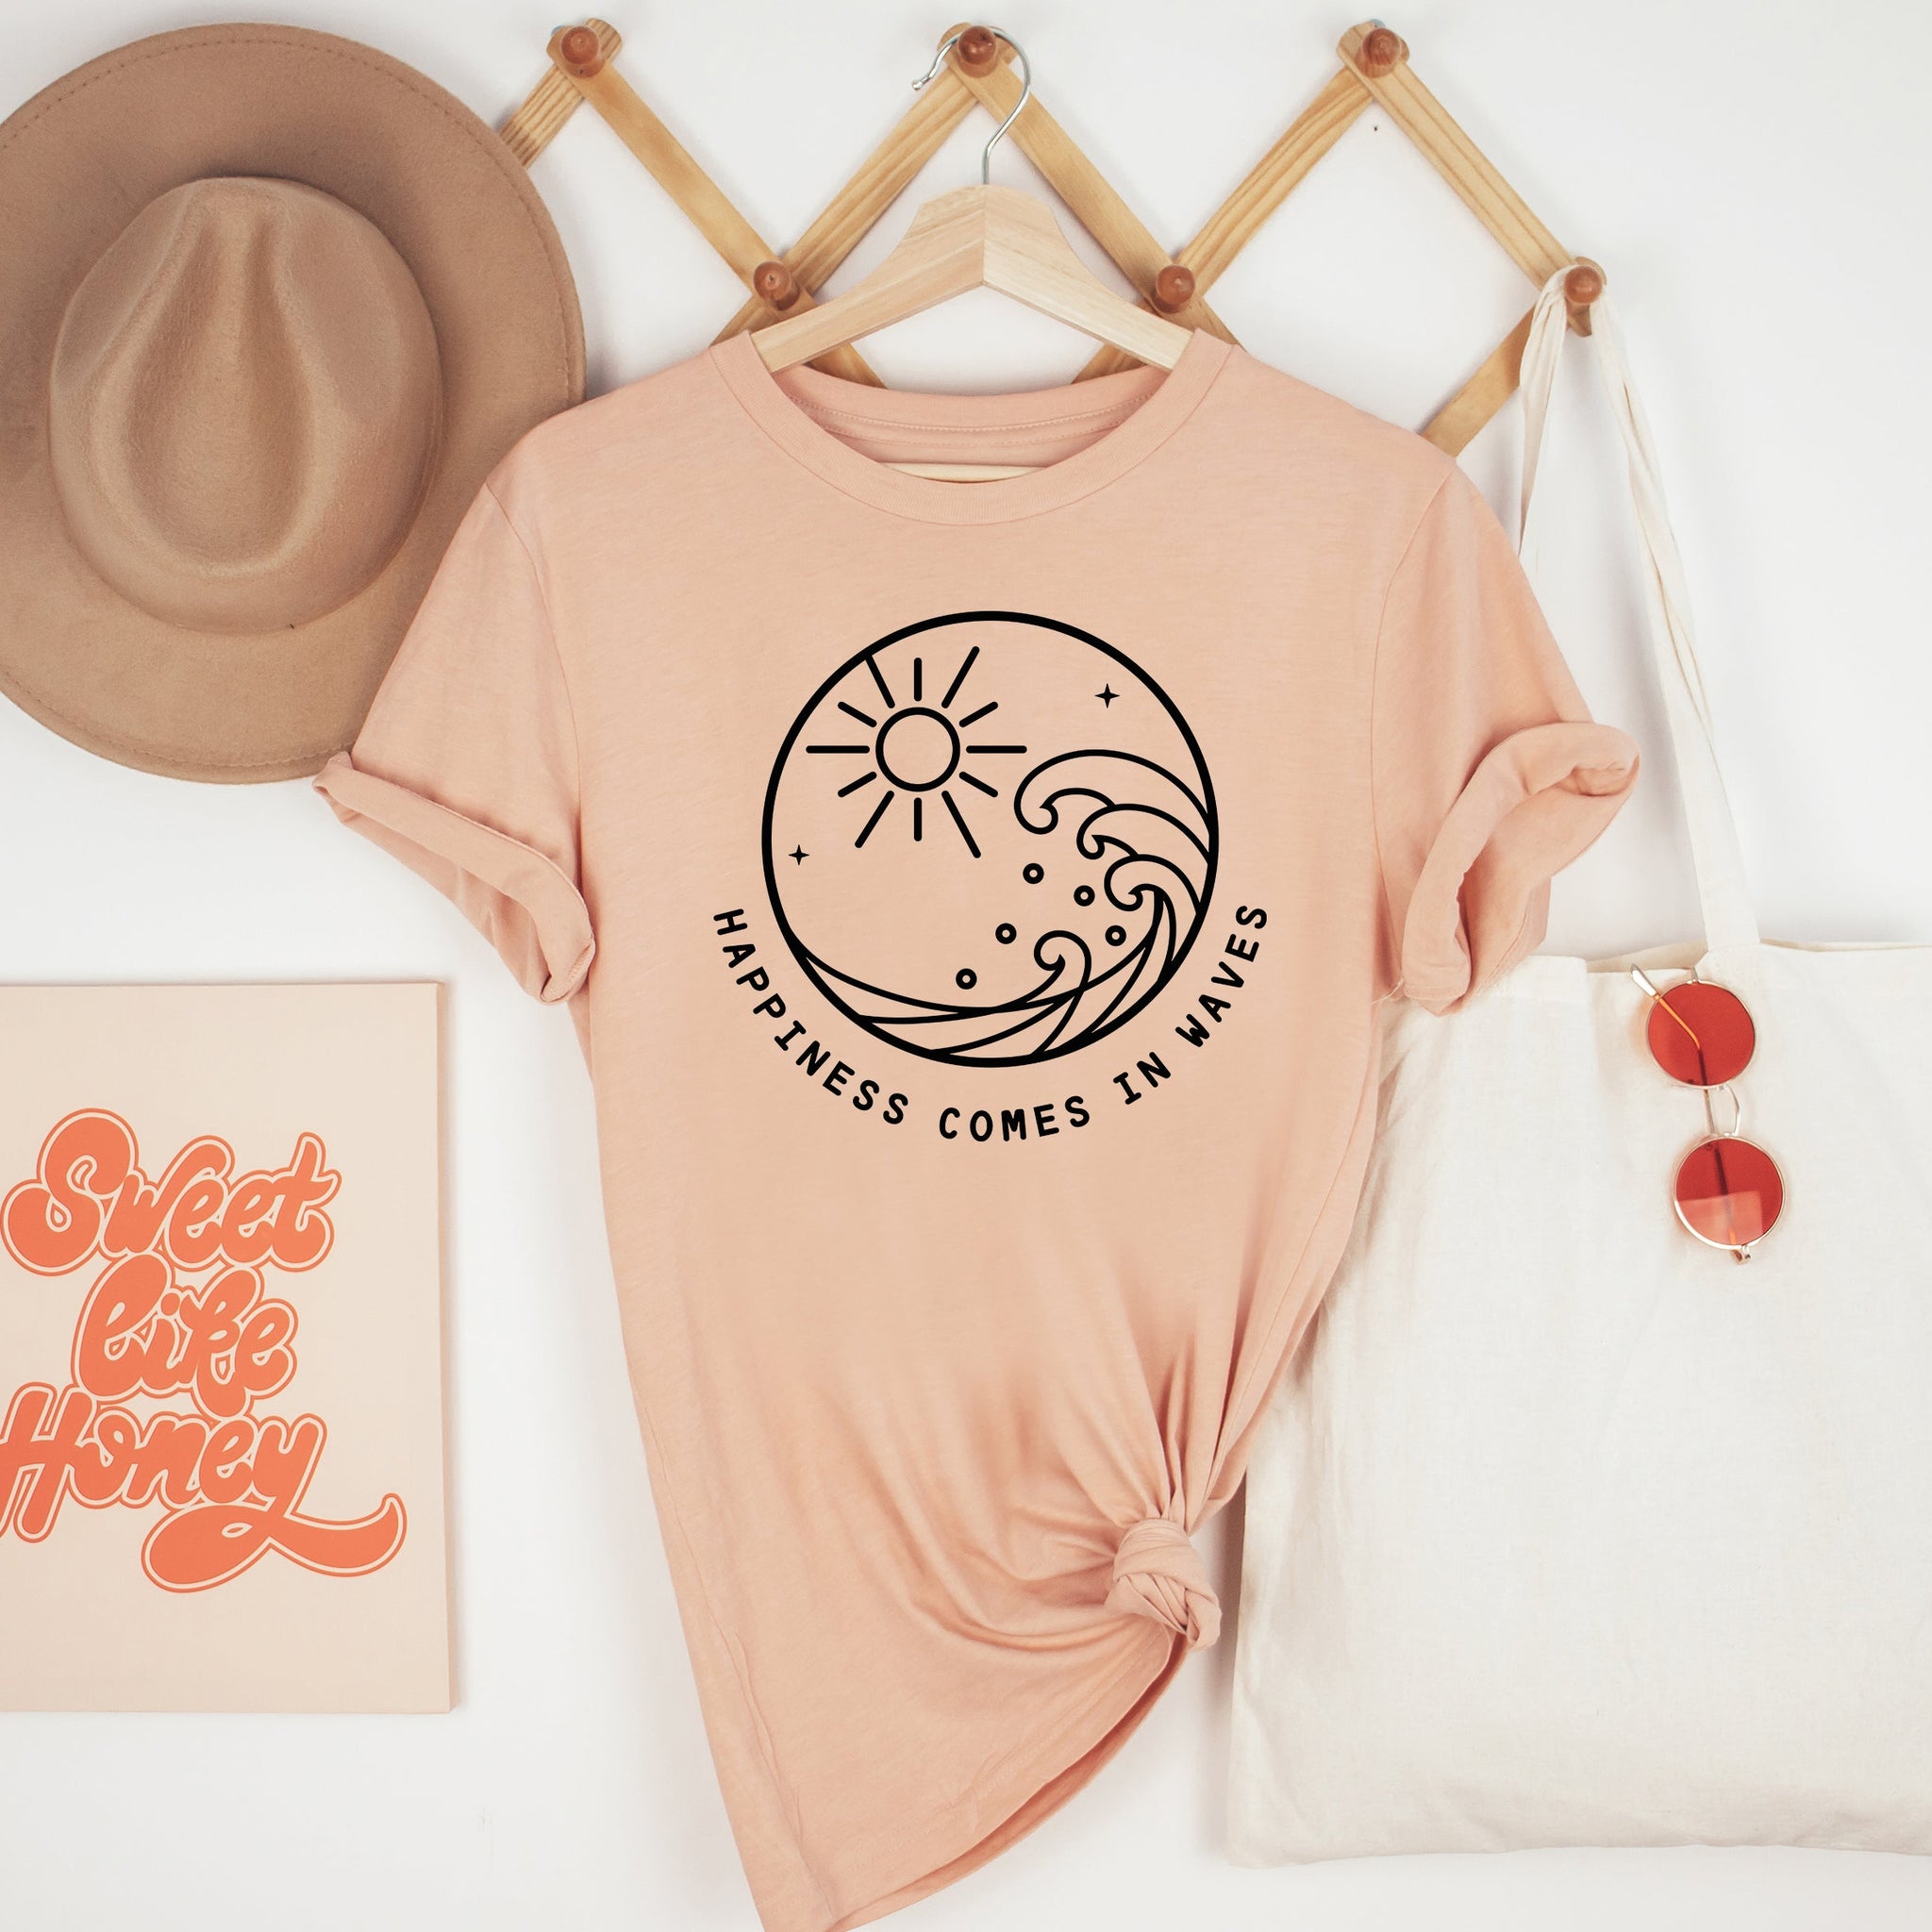 Happiness comes in waves Summer Tees